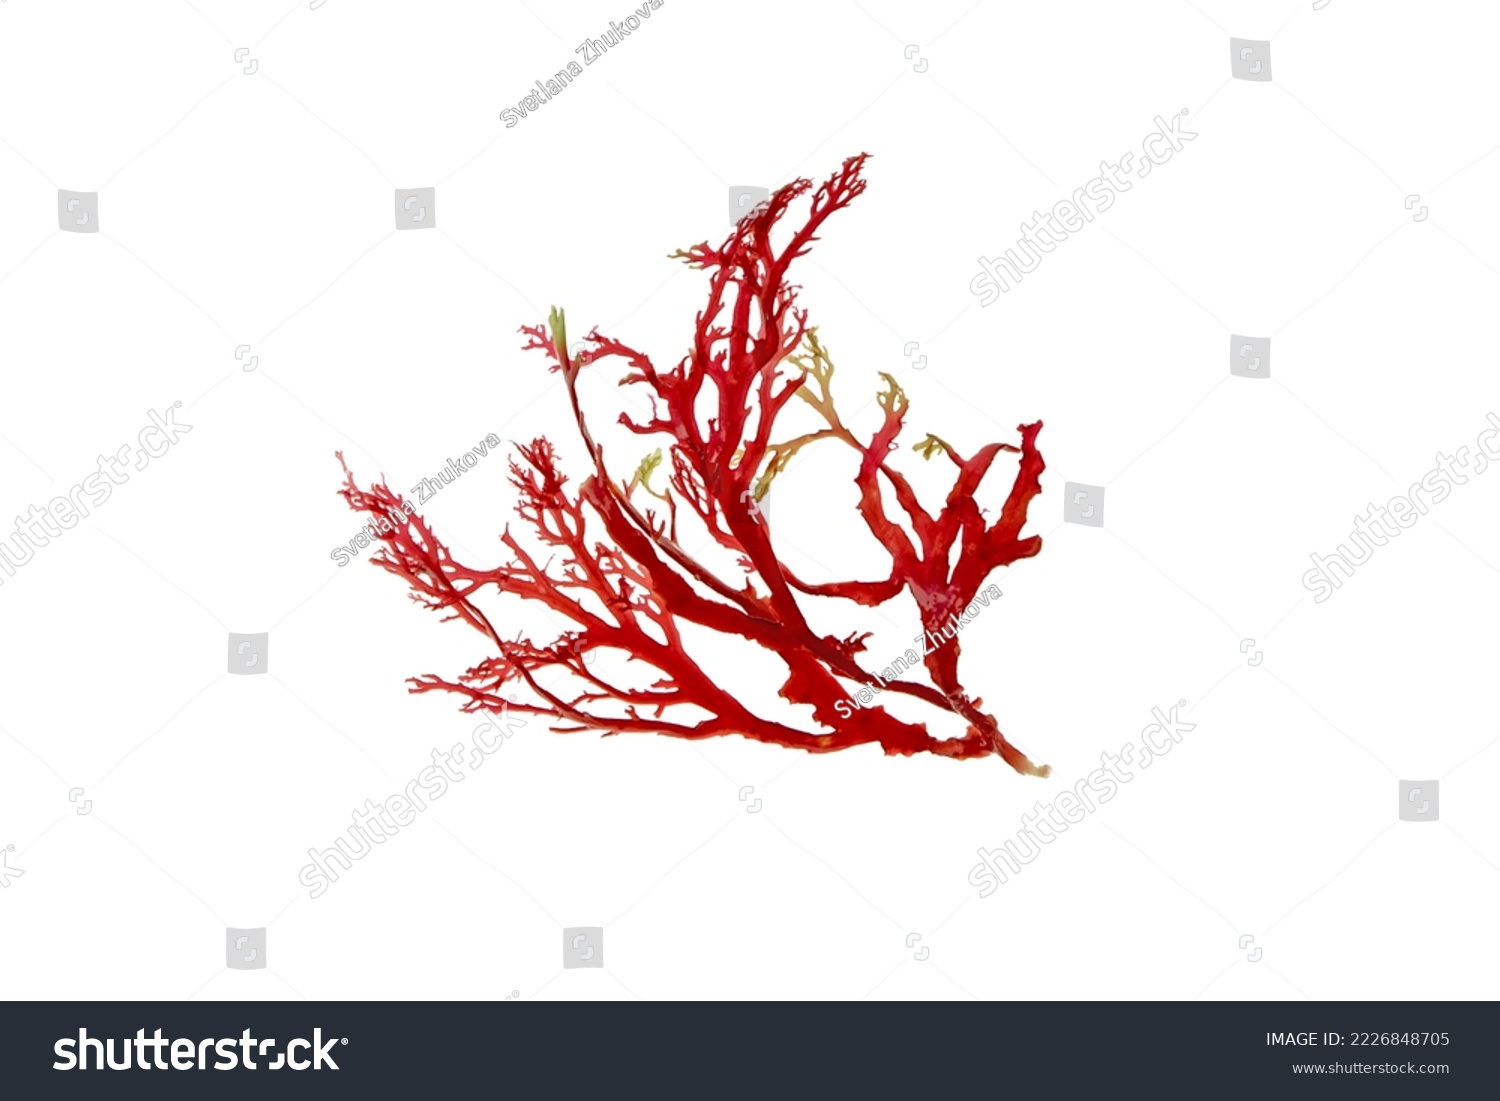 Red seaweed or algae branch isolated on white. #2226848705